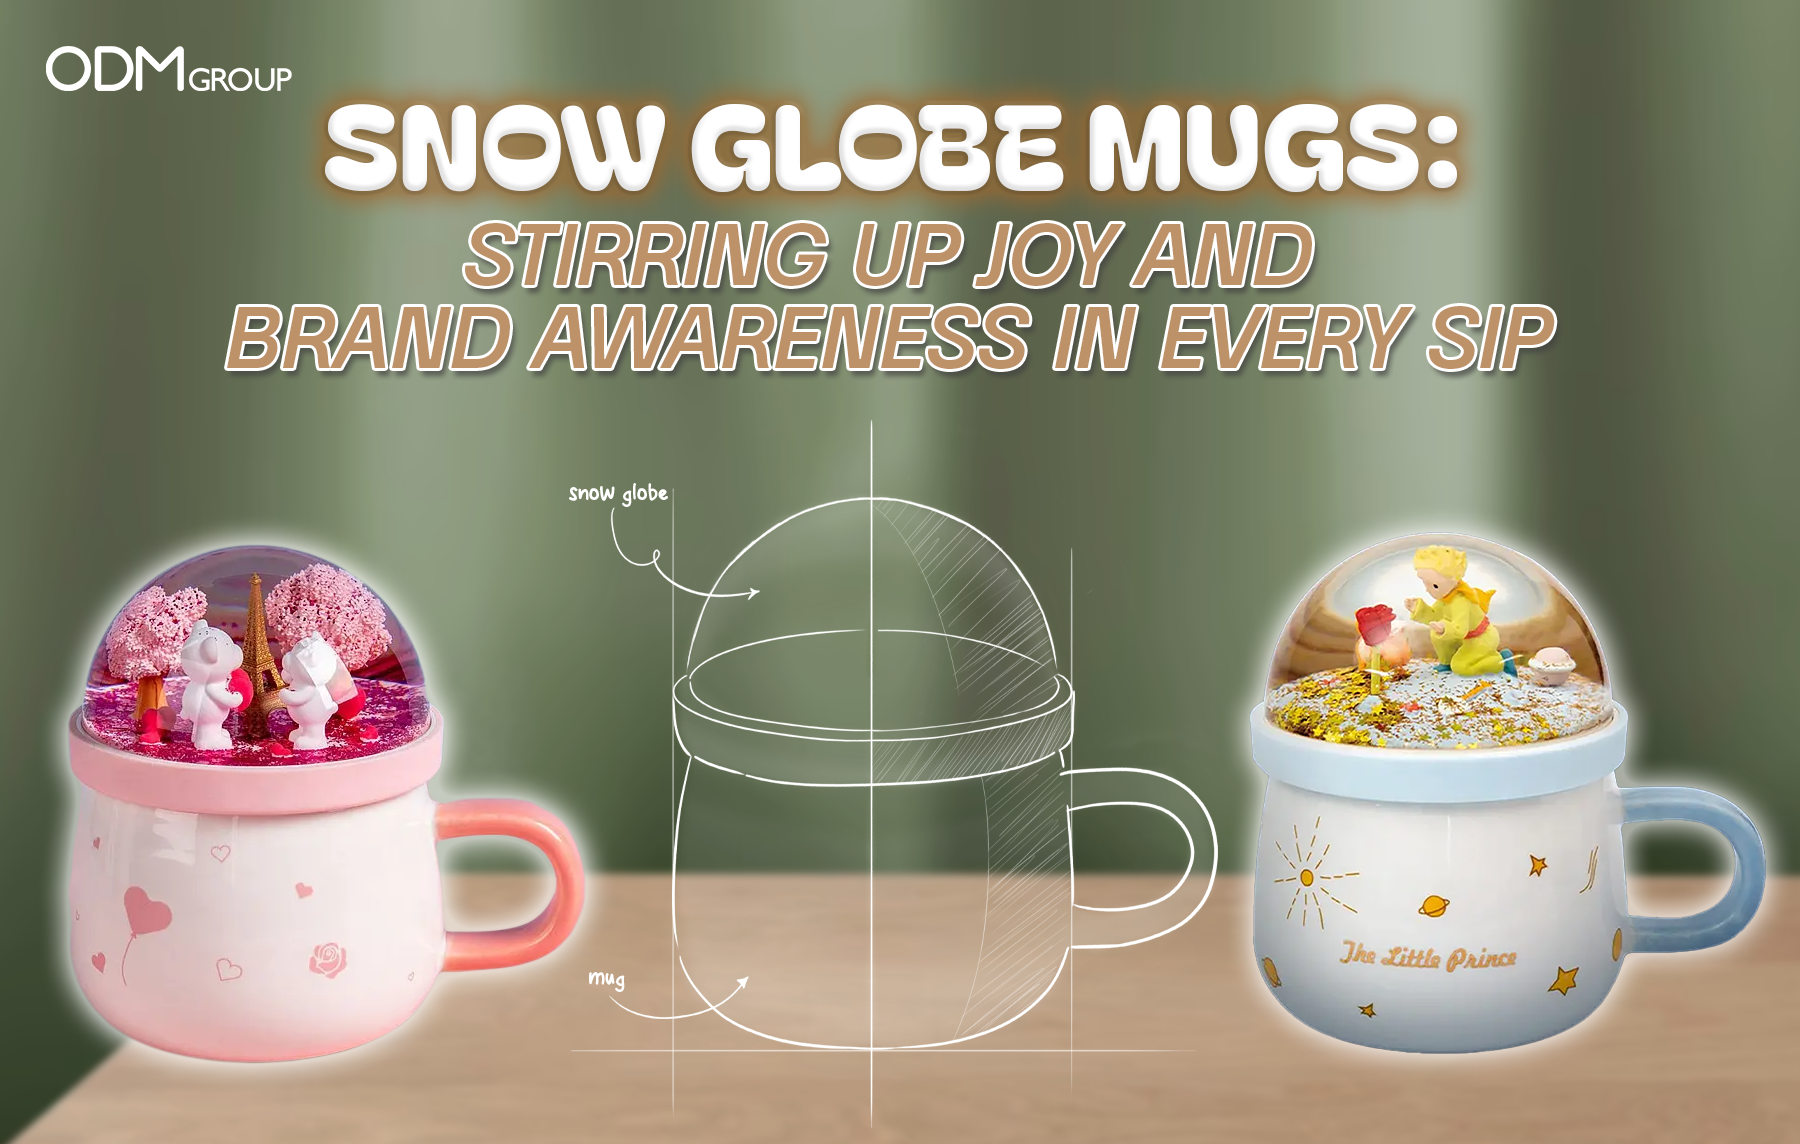 Custom snow globe mugs with whimsical designs by ODM Group.